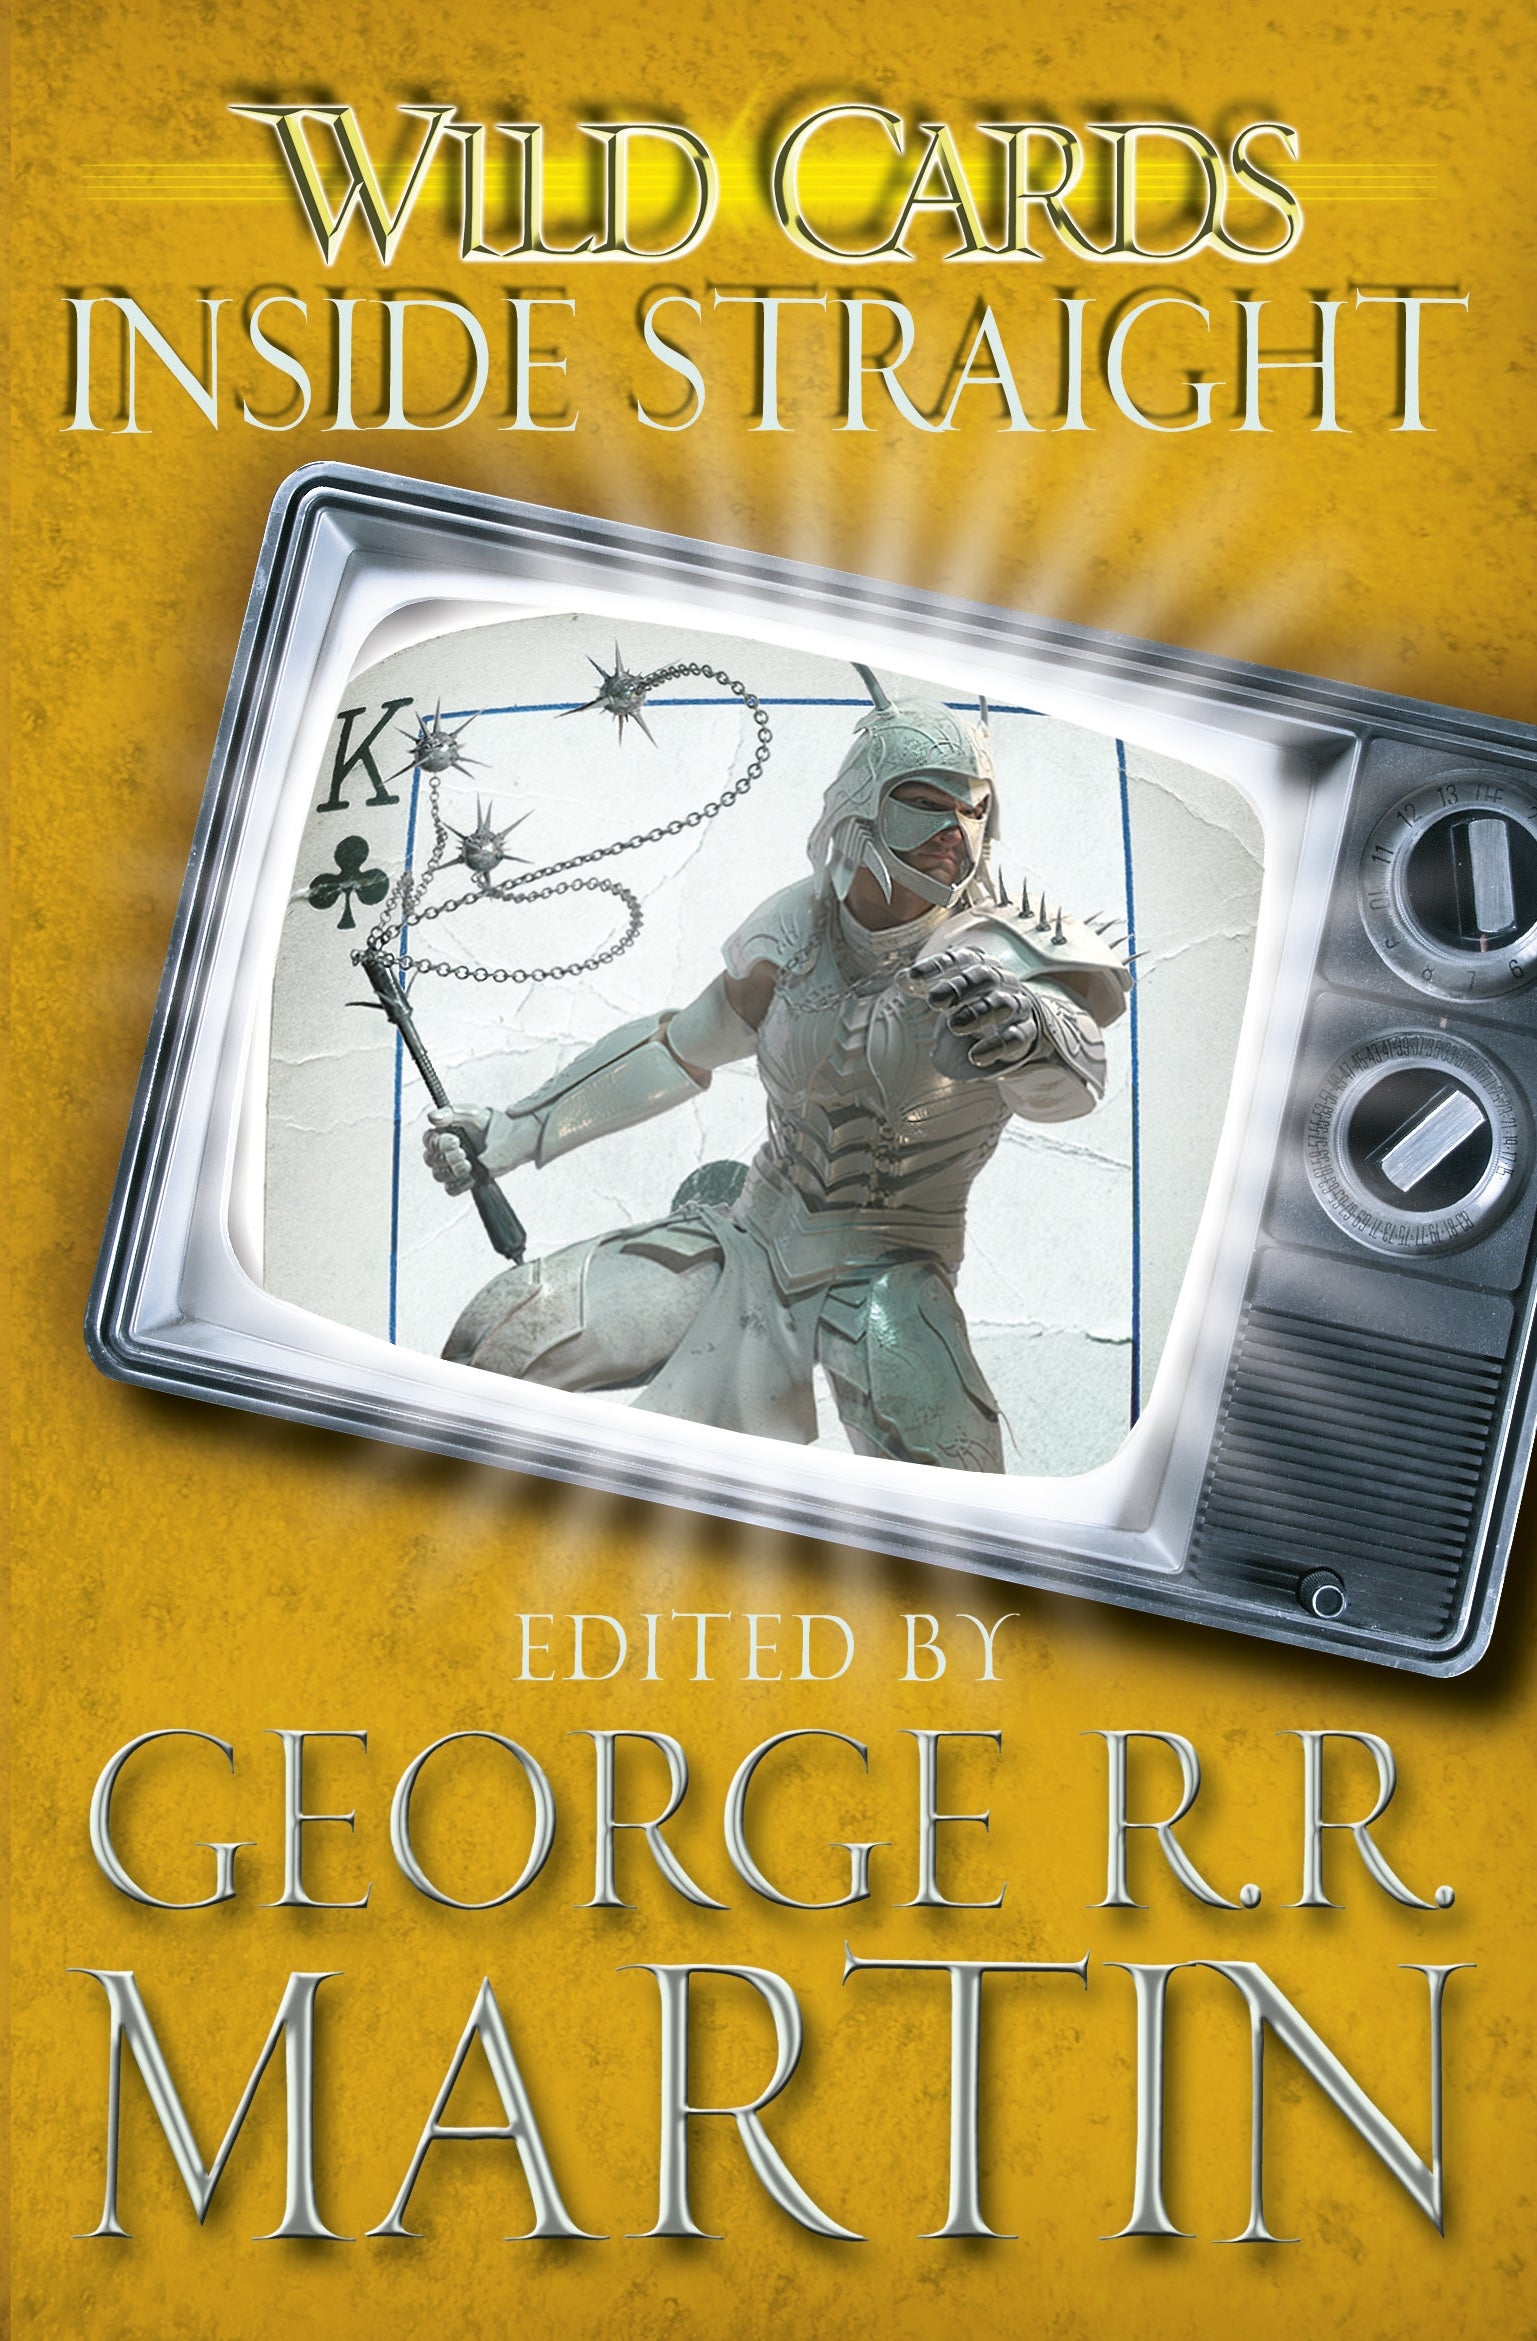 Wild Cards: Inside Straight by George R.R. Martin